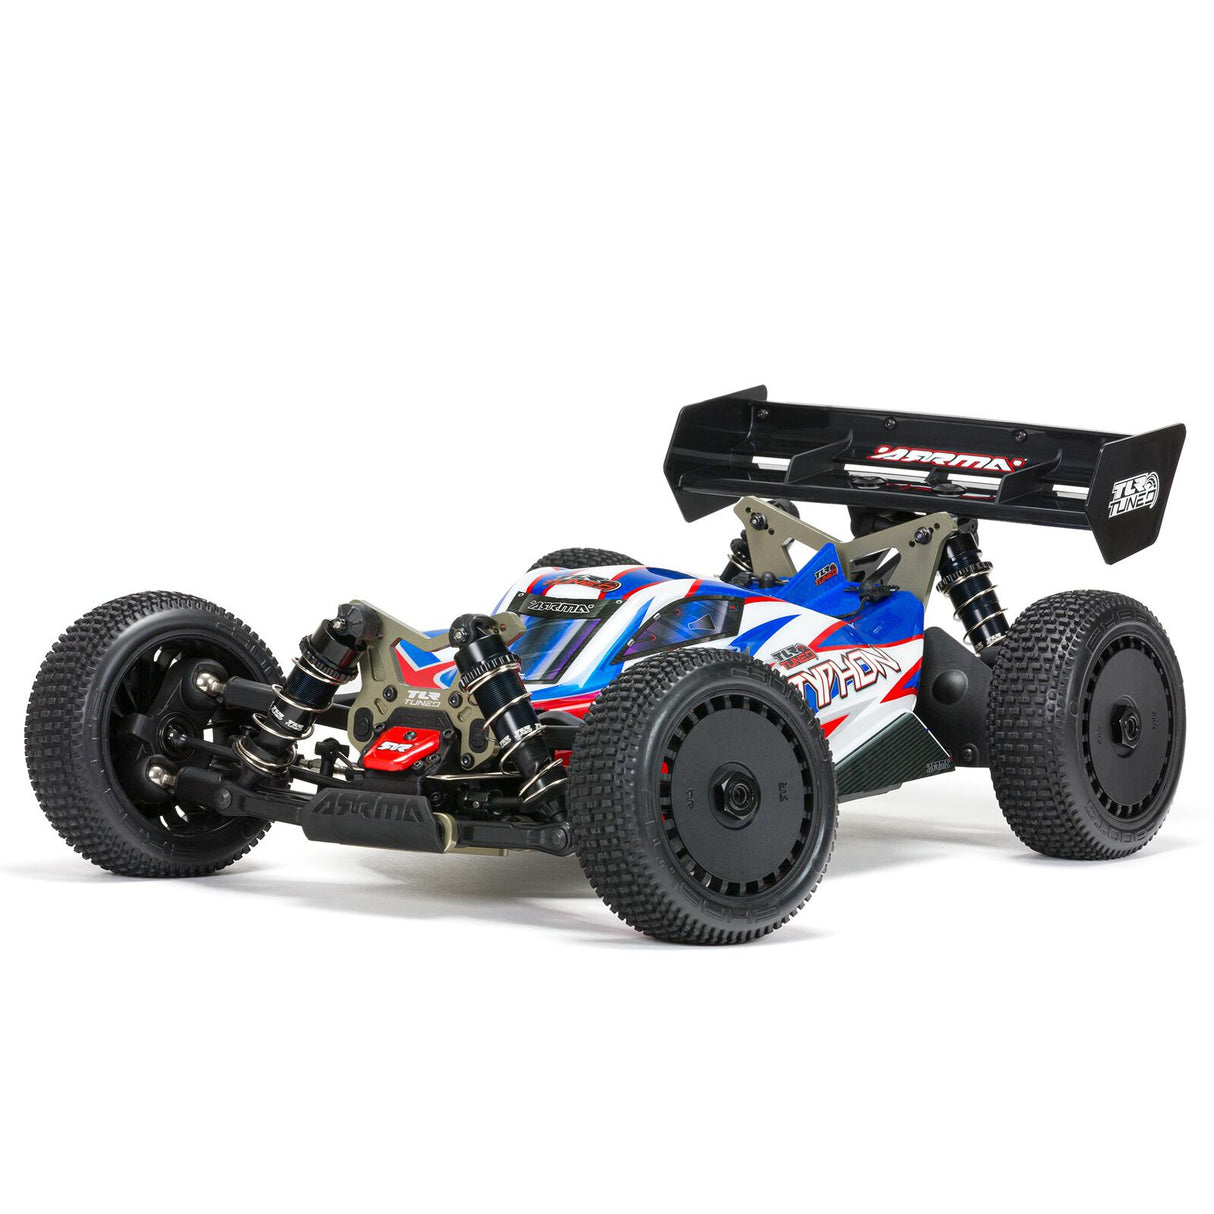 TLR Tuned Arrma TYPHON 4S Race or 6S Bash 4WD BLX 1/8 Buggy